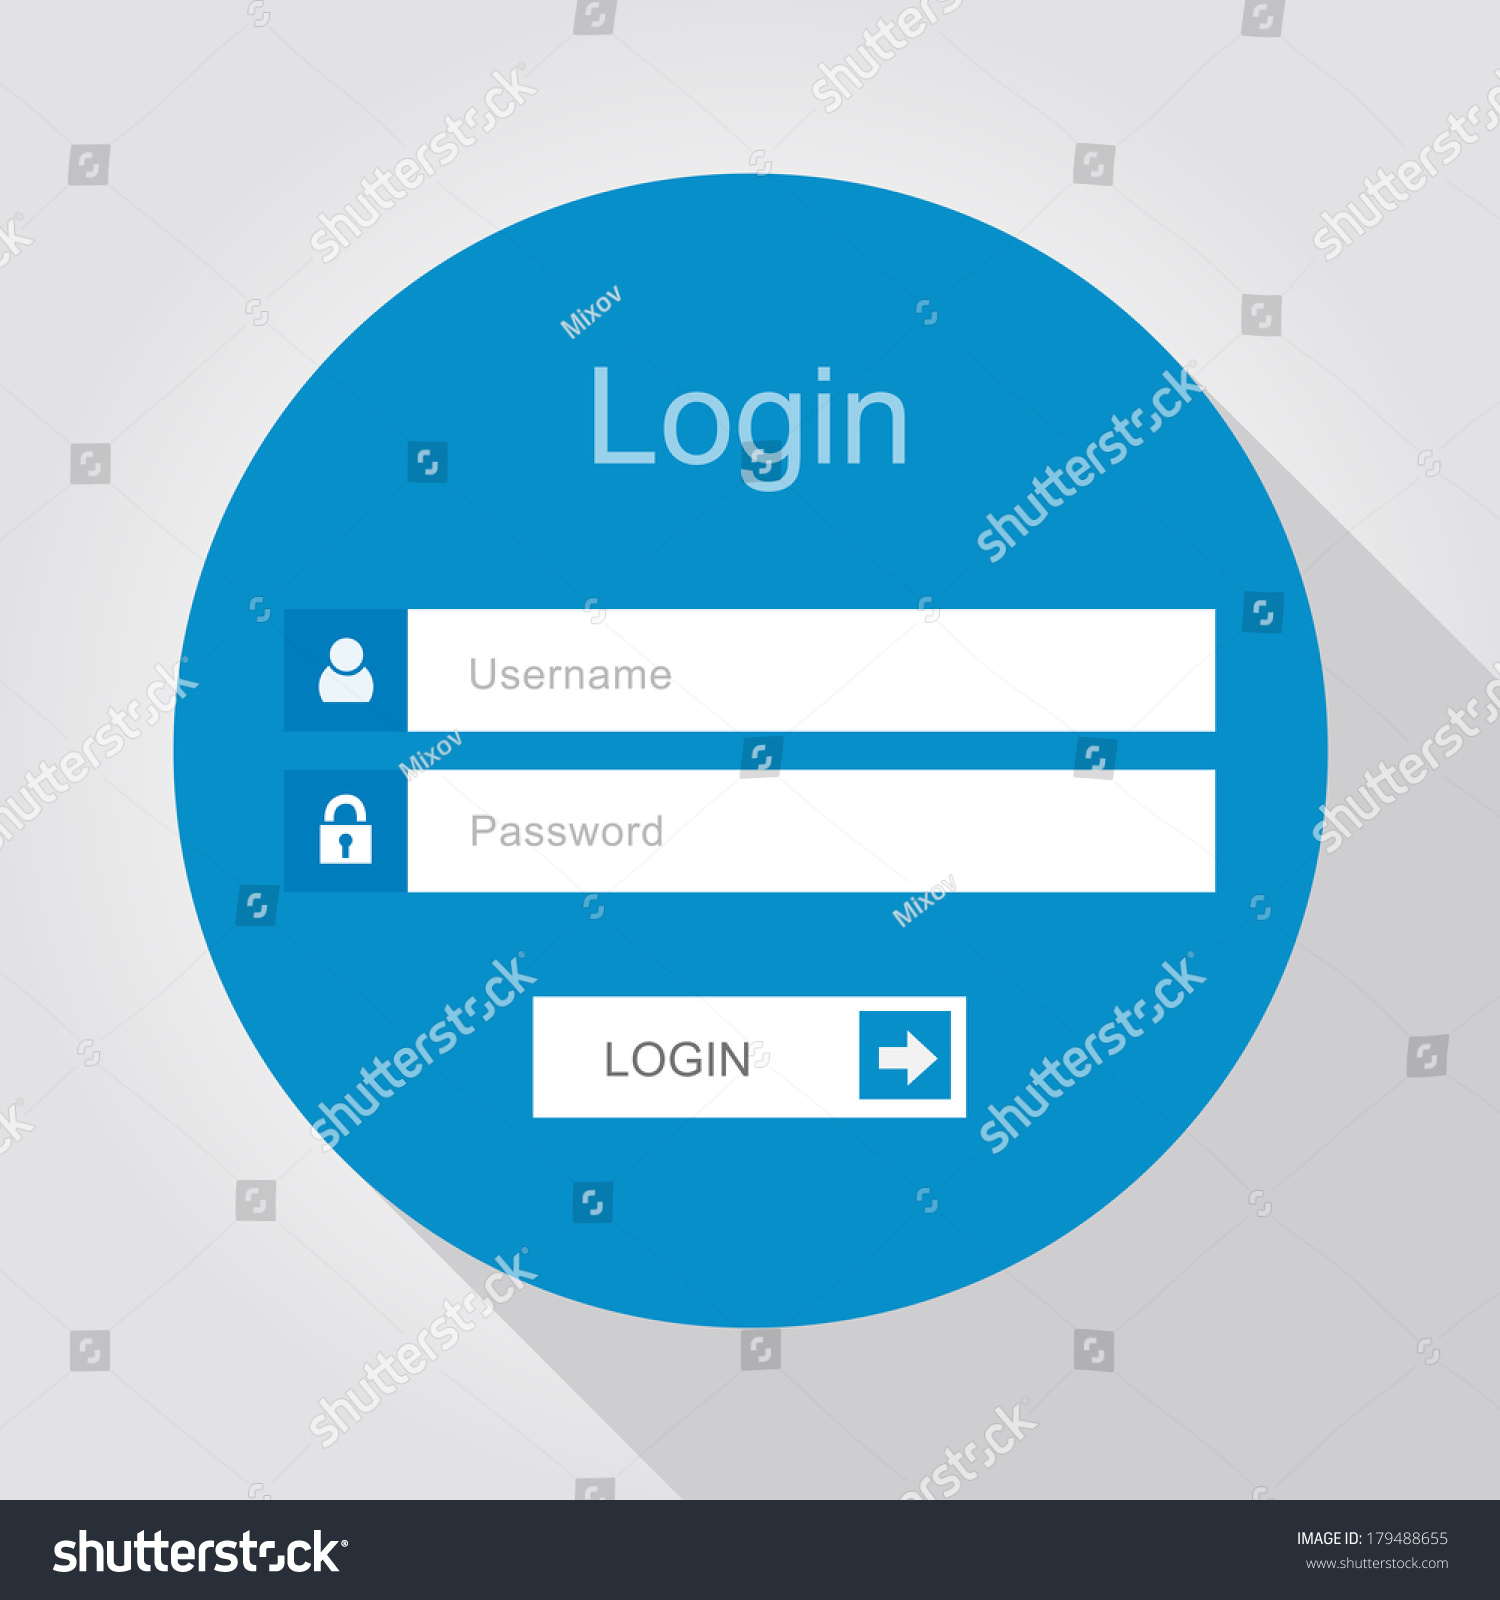 Login authentication with Flask  Python Tutorial